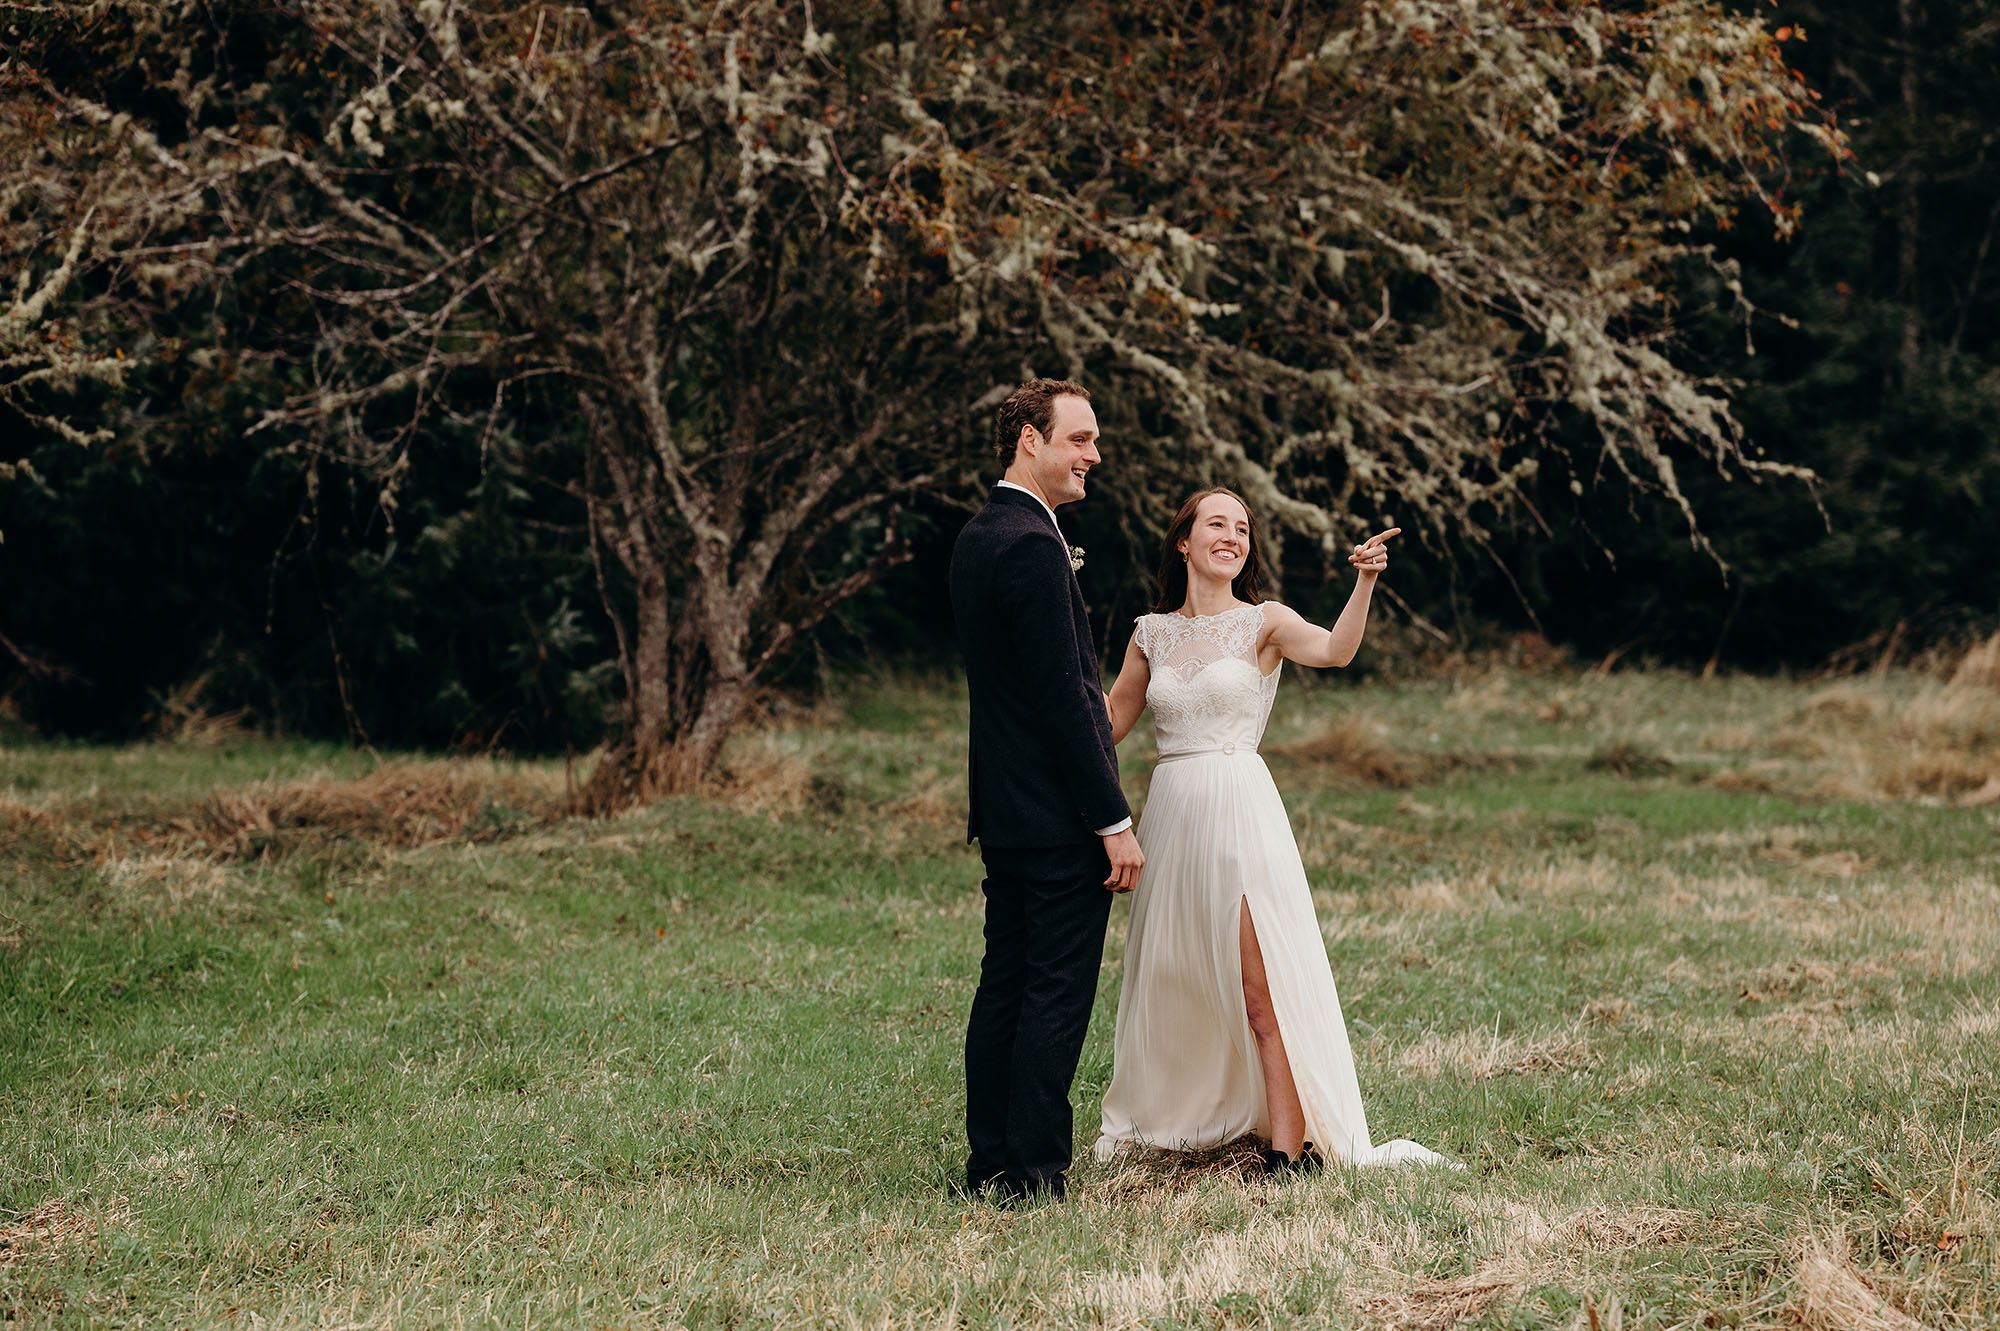 Bride & Groom First Look in Field by Briana Morrison Photography